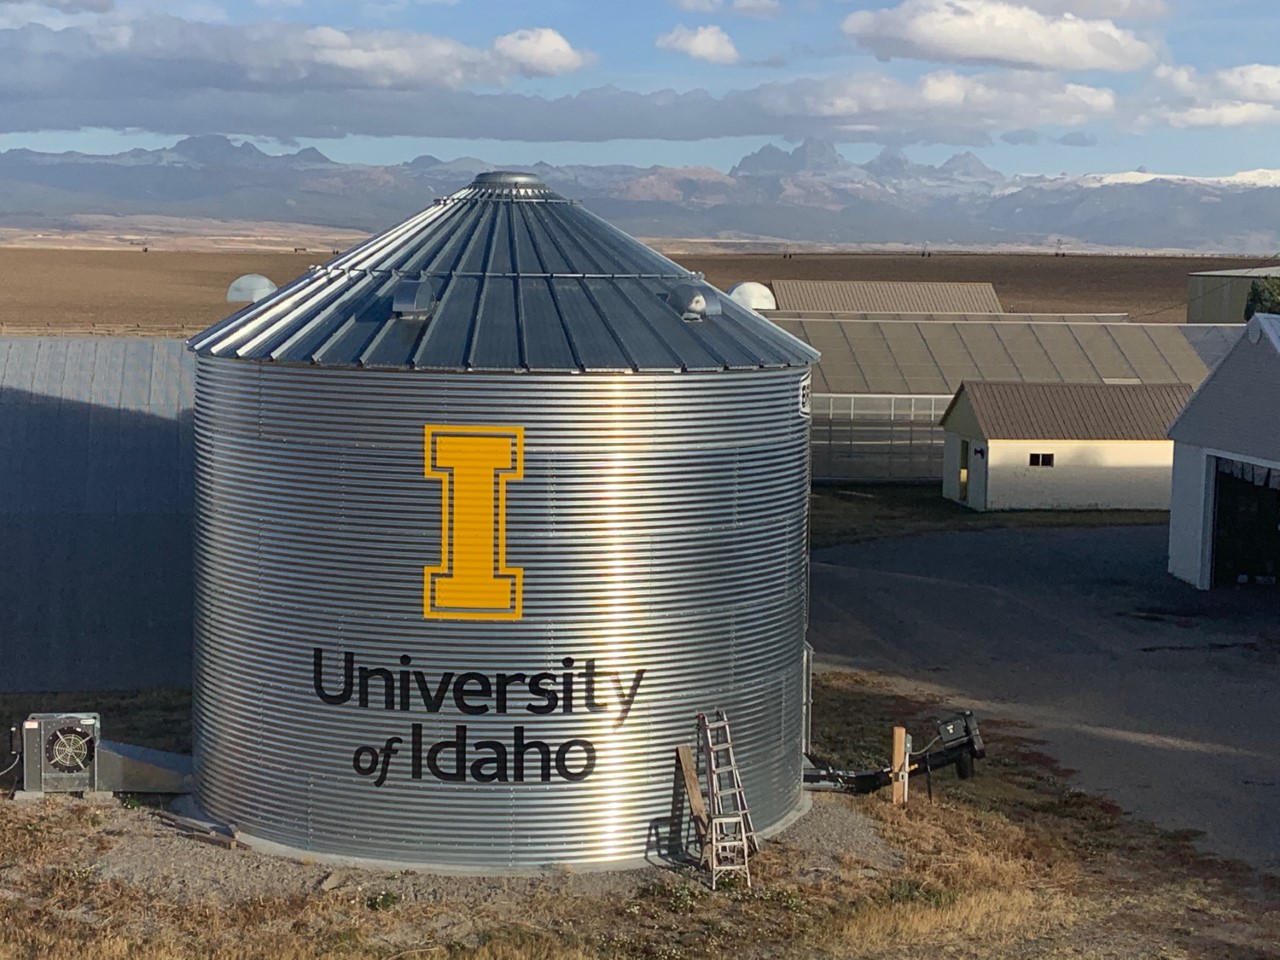 Grain bin with the text "University of Idaho" located in Newdale, Idaho.